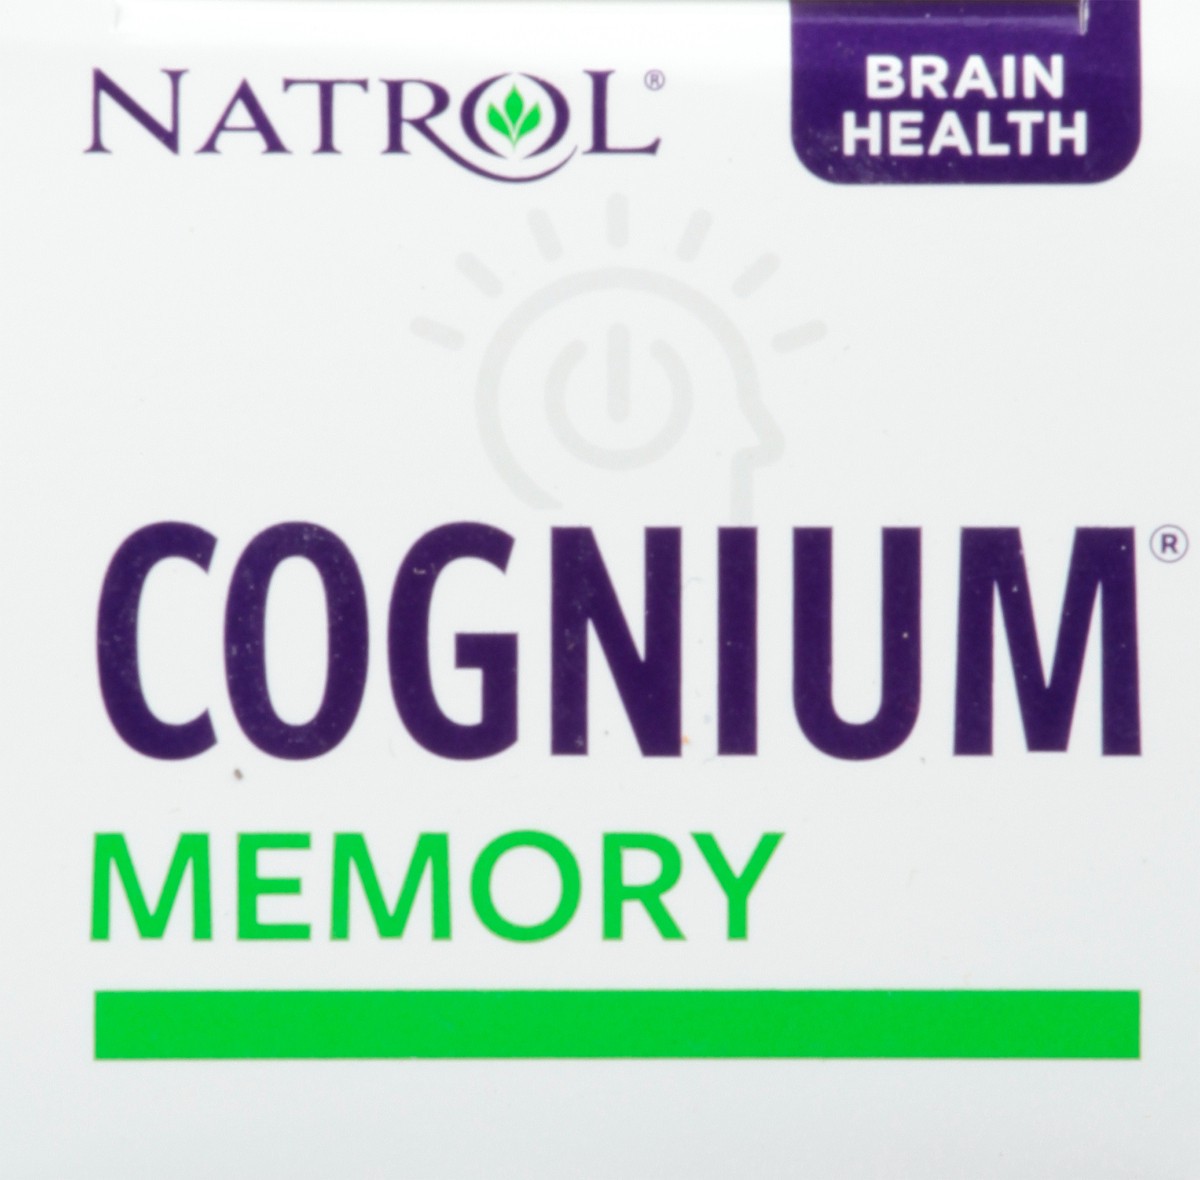 slide 13 of 14, Natrol Cognium Memory Silk Protein Hydrolysate 100mg, Dietary Supplement for Brain Health Support, 60 Tablets, 30 Day Supply, 60 ct